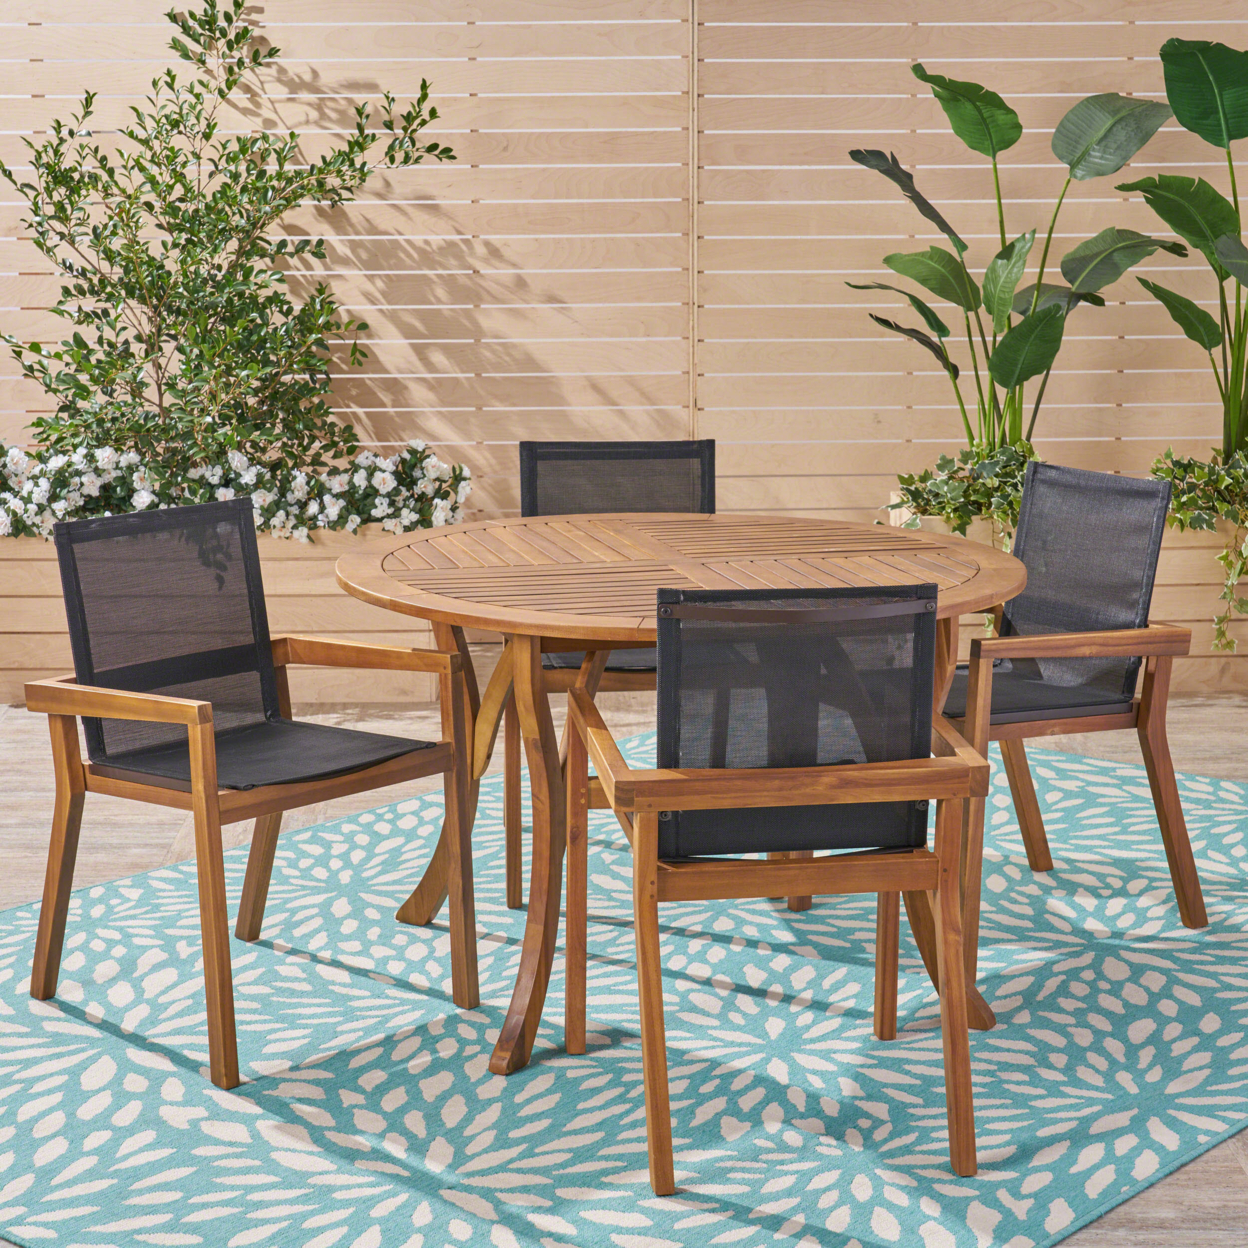 Spencer Outdoor Acacia Wood 5 Piece Round Dining Set With Mesh Seats - Gray